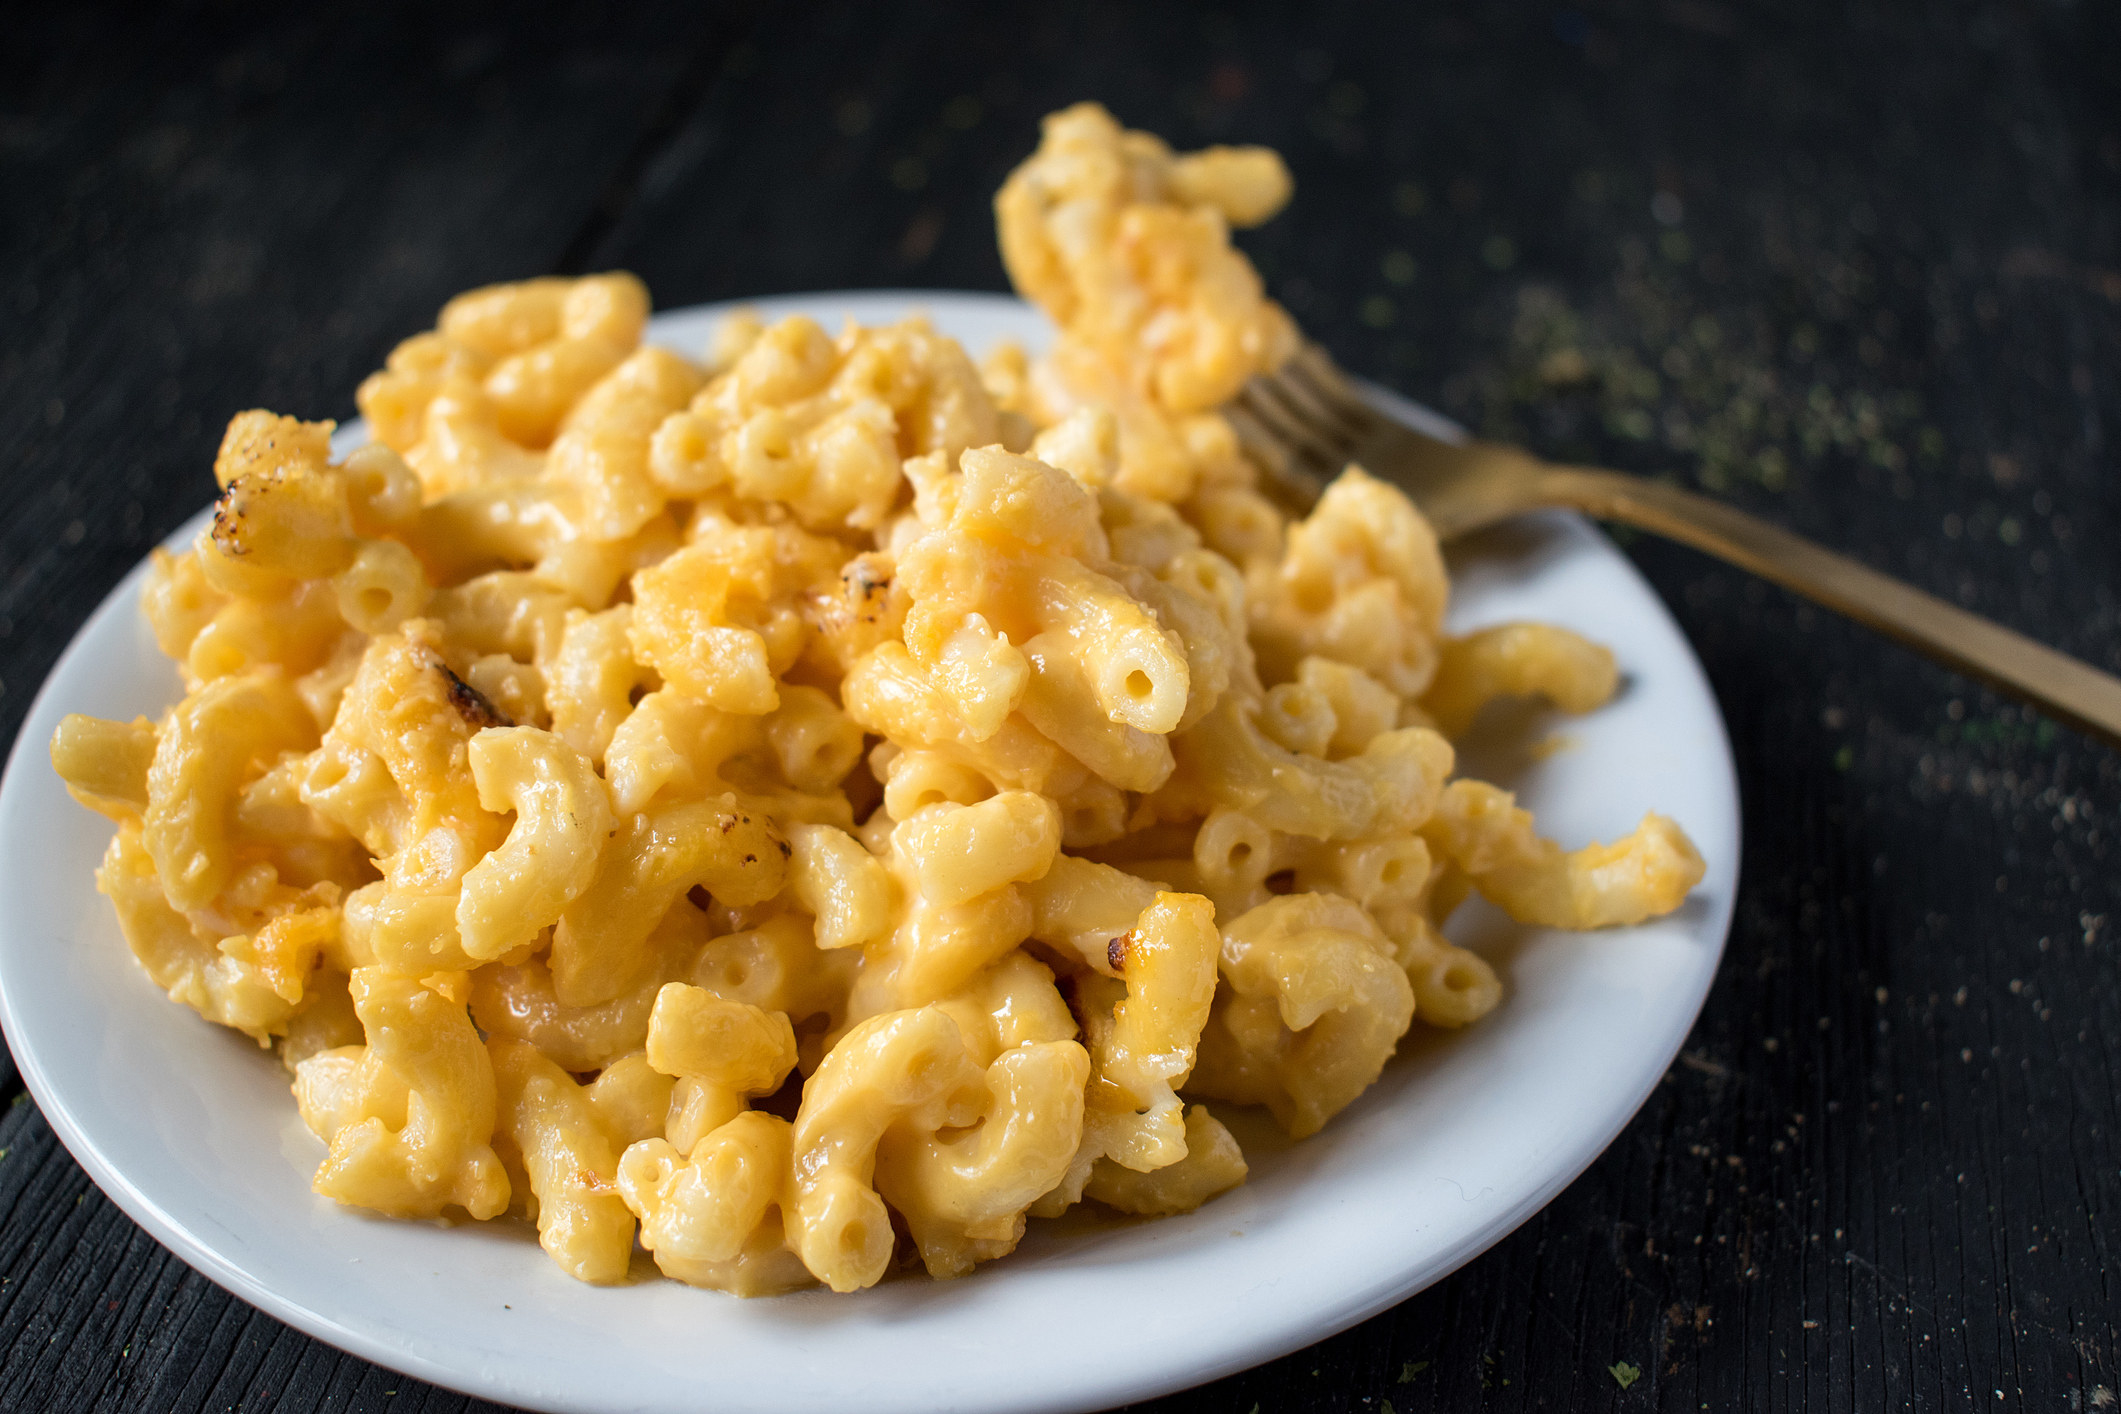 Macaroni and cheese noodles in dish.